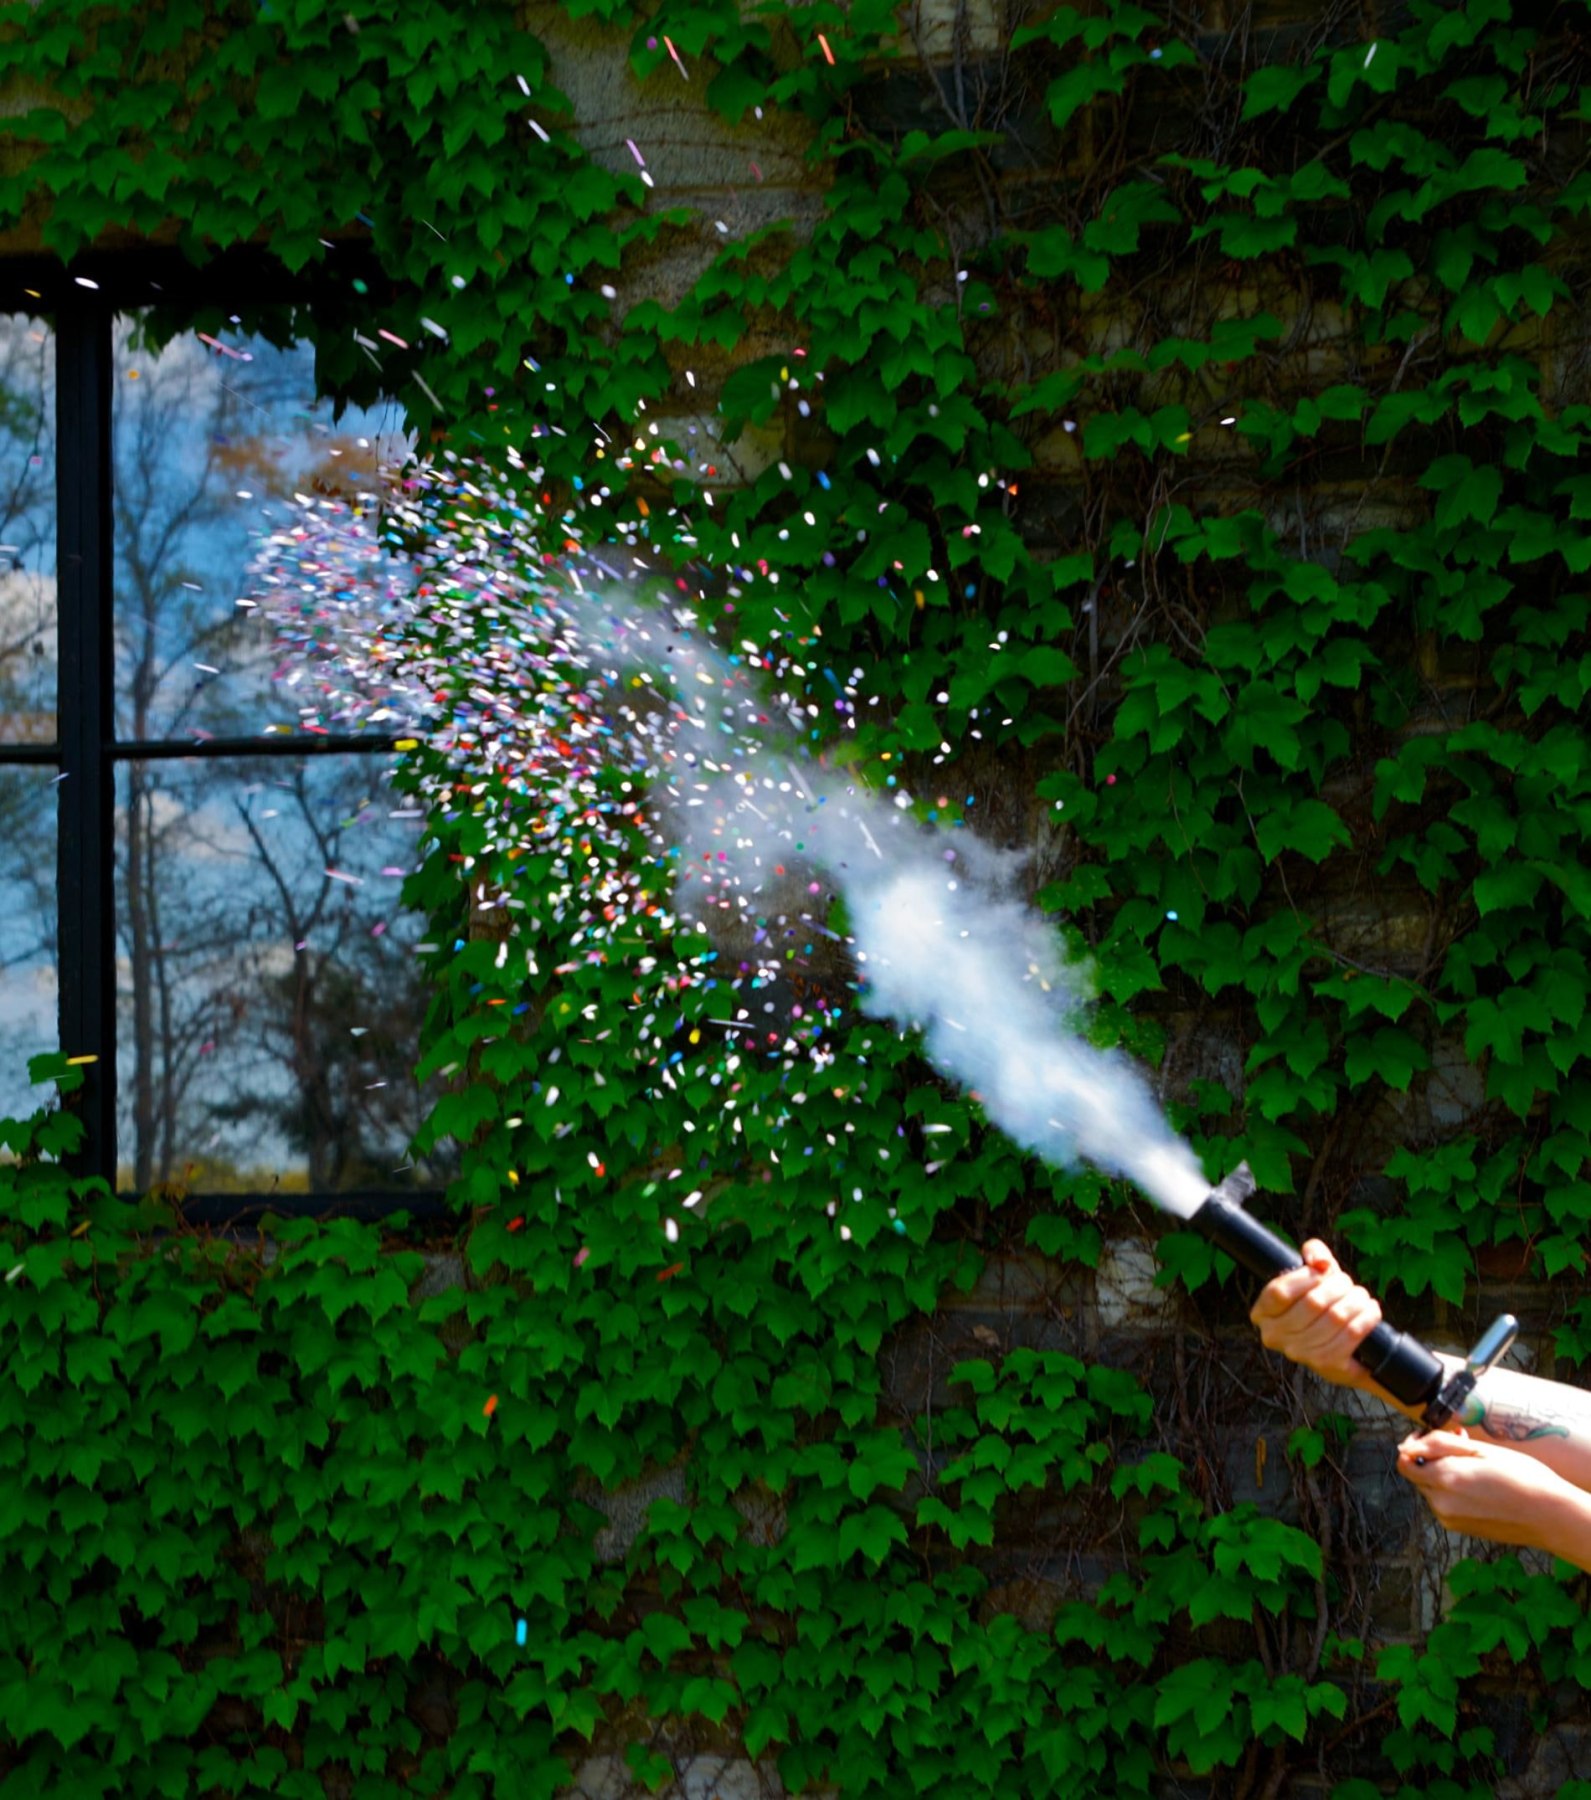 confetti cannon launching confetti against an ivy-covered wall as the background